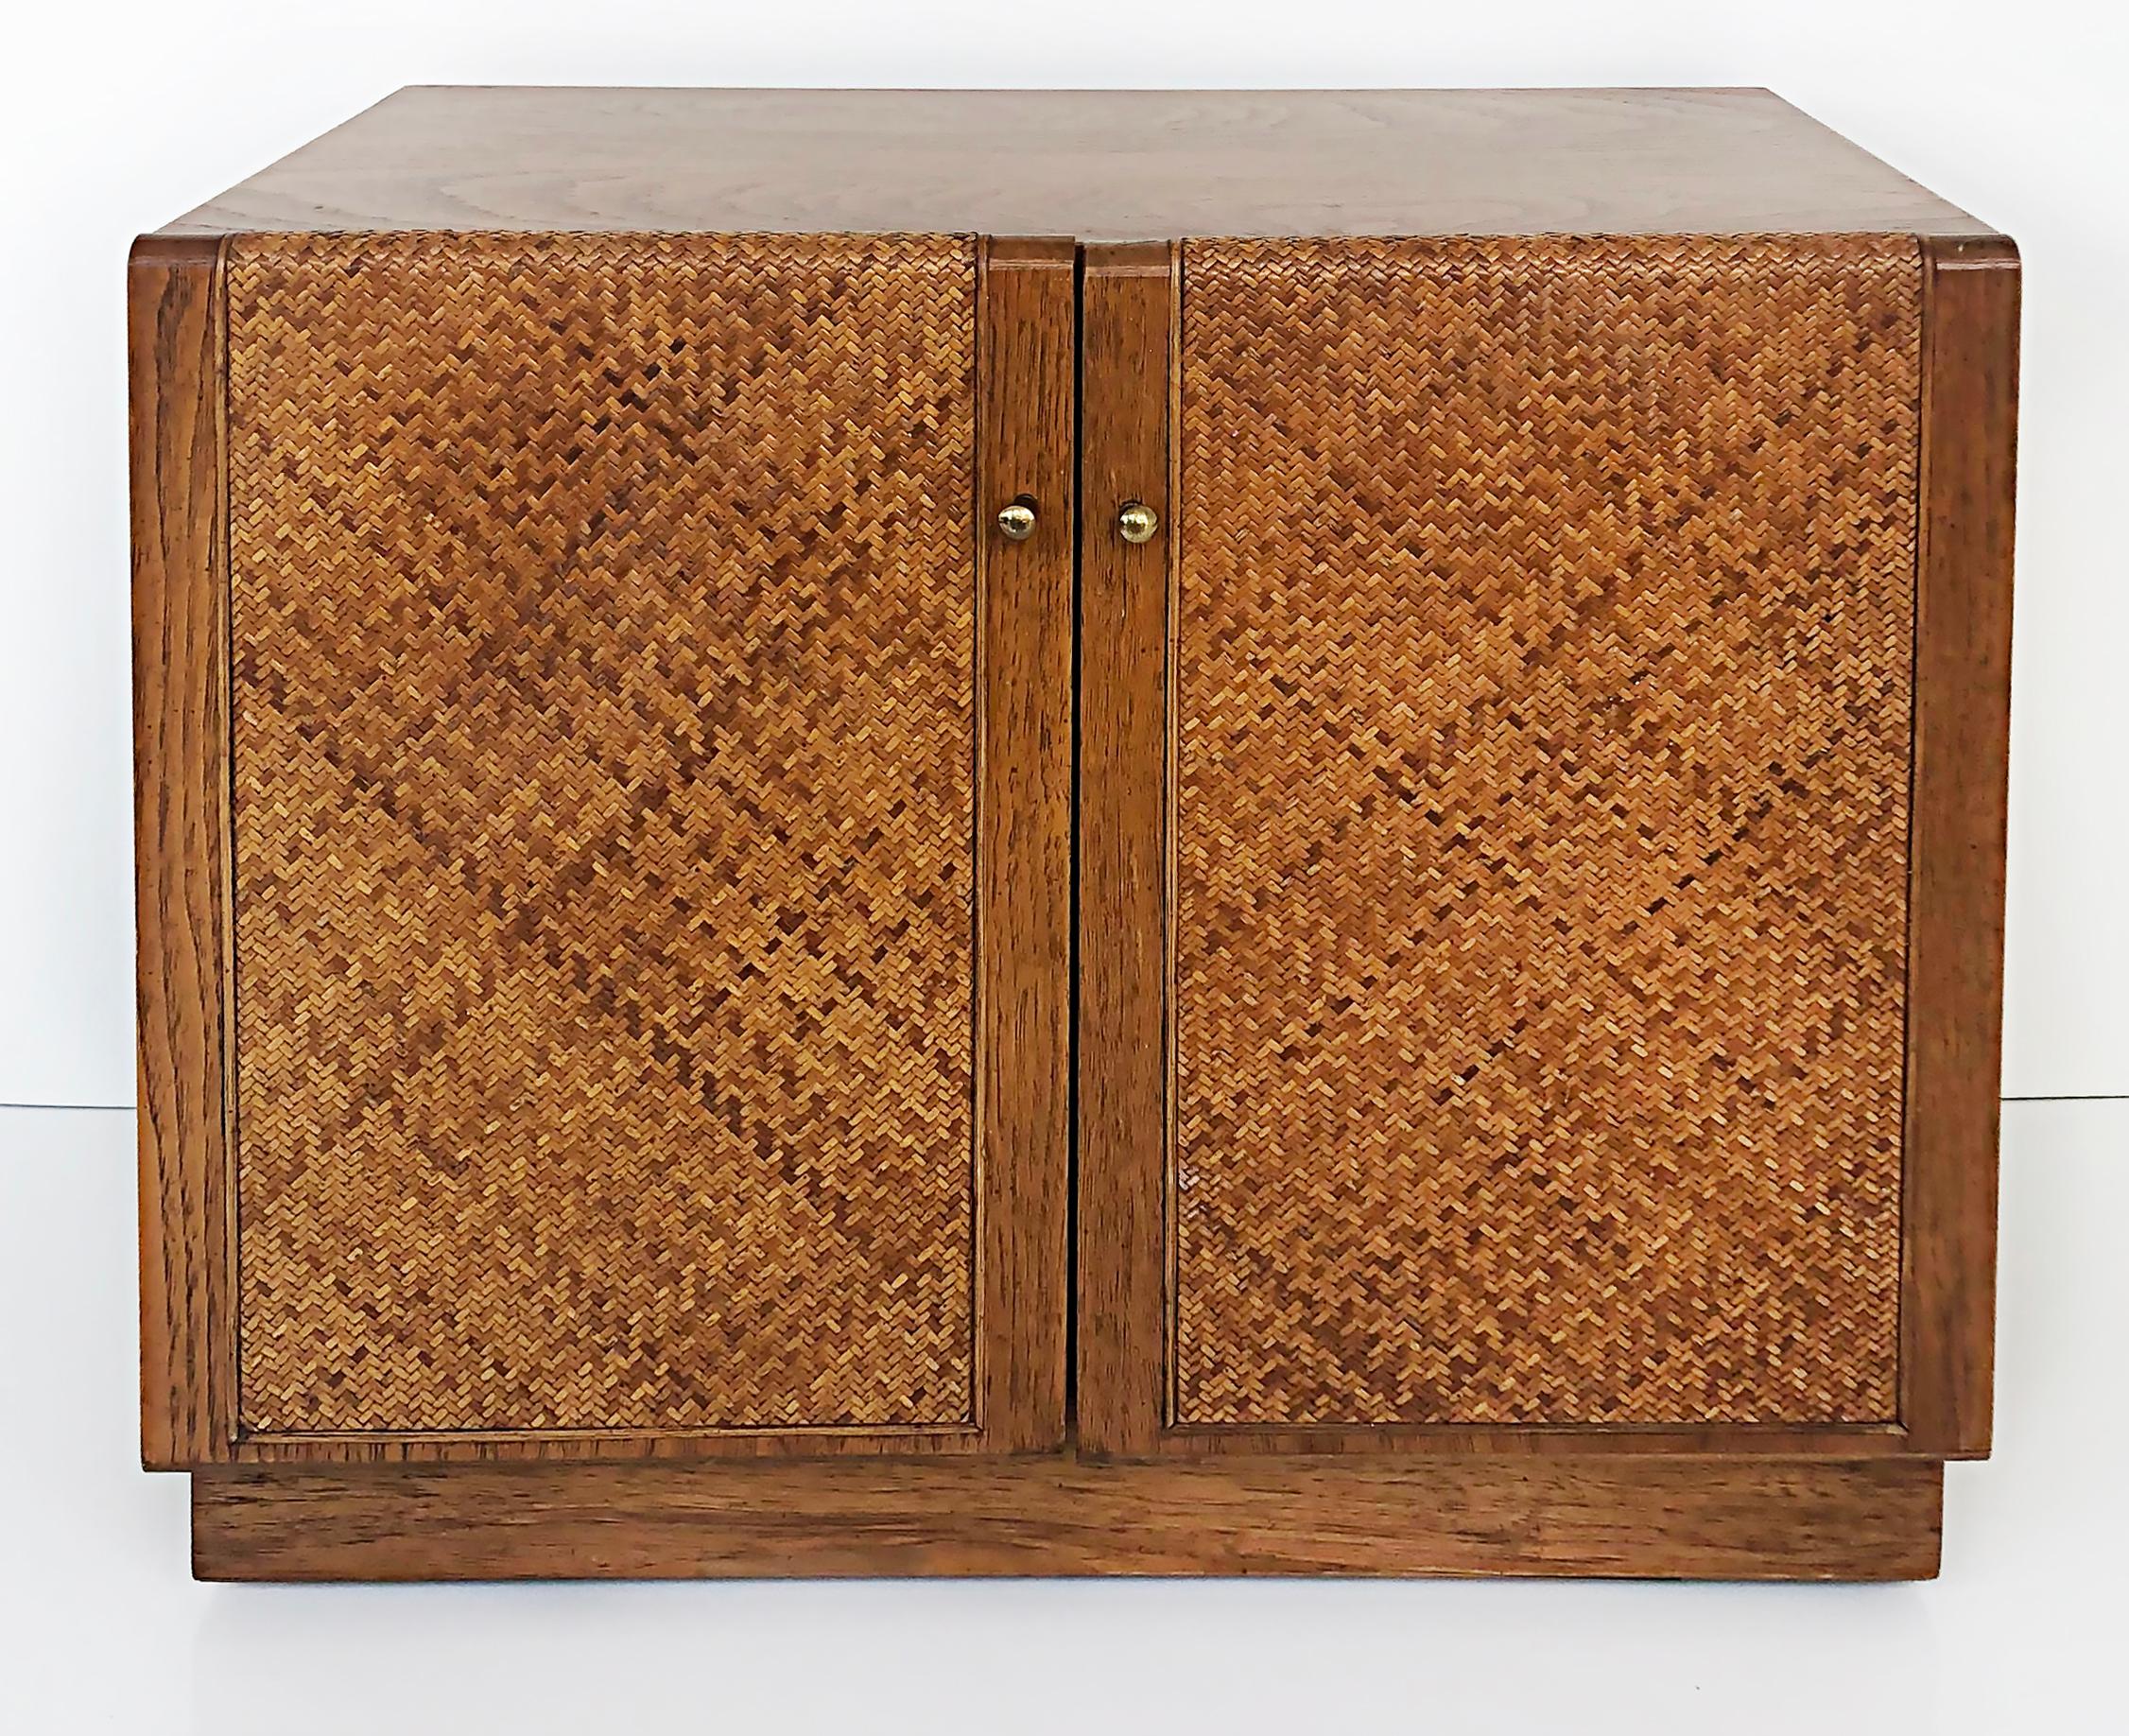 Thomasville Founders Woven Cane 2-door oak nightstand with brass pulls 

Offered for sale is a Thomasville Founders oak two-door cabinet with woven cane doors, brass door pulls, and open shelves. This nightstand matches a dresser we have available